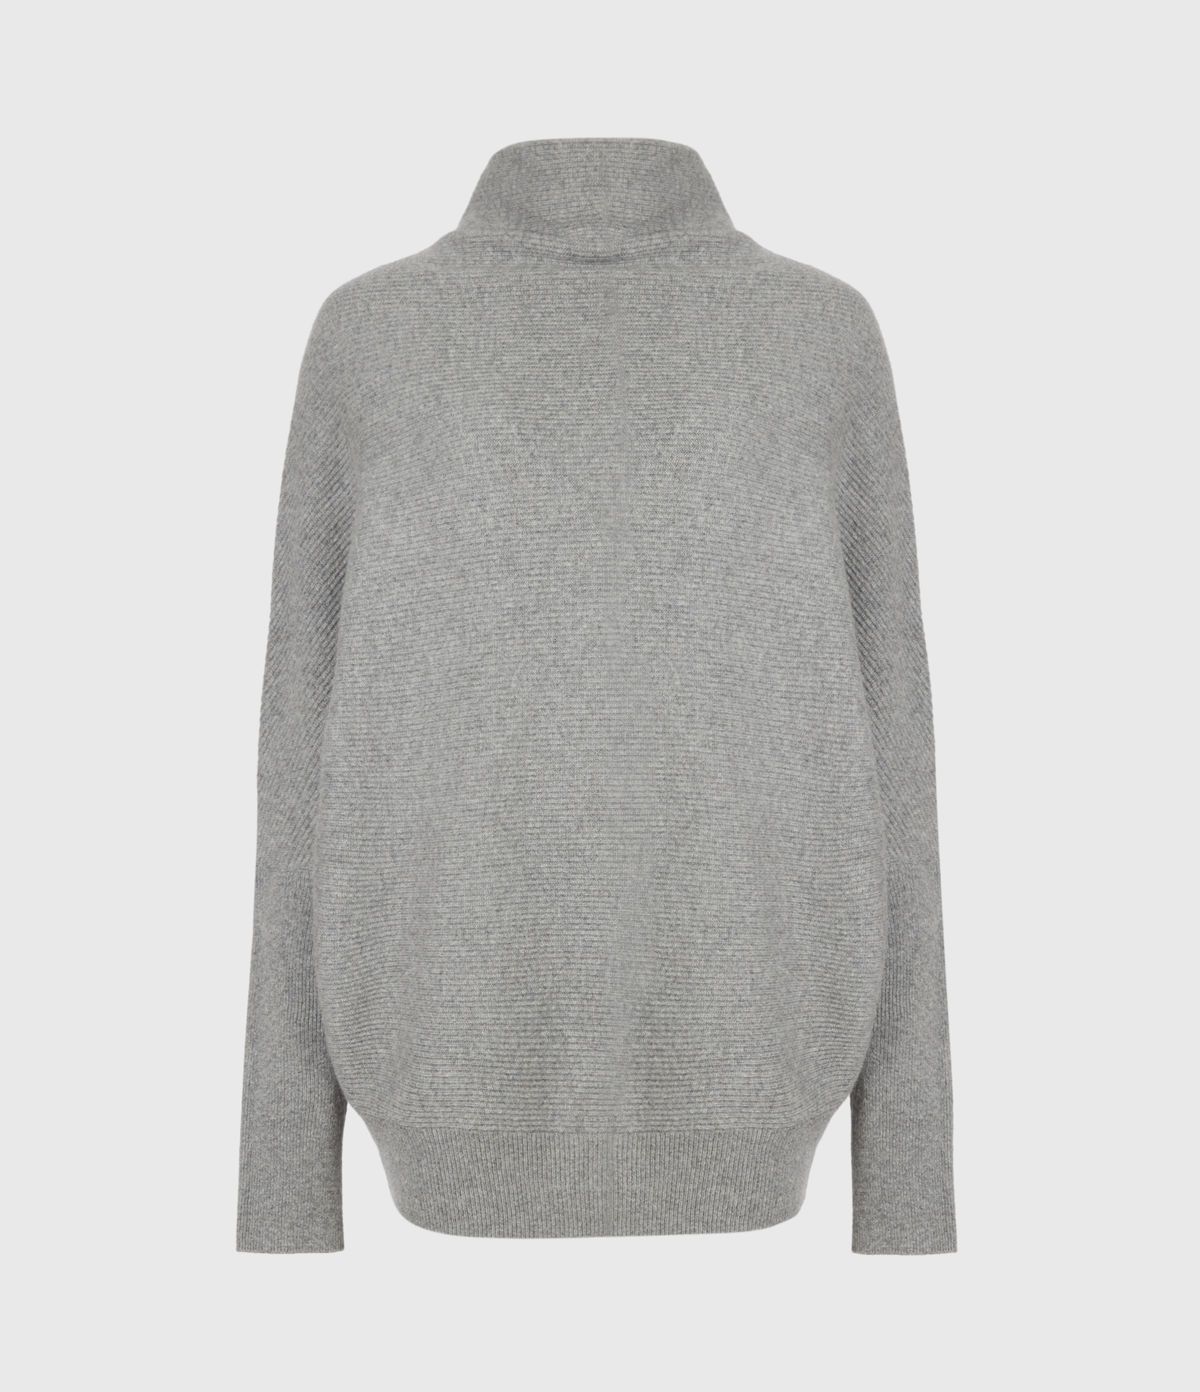 30% OFF APPLIED
 
Ridley Cashmere Jumper


Was £229.00

£160.30 in promo | AllSaints UK